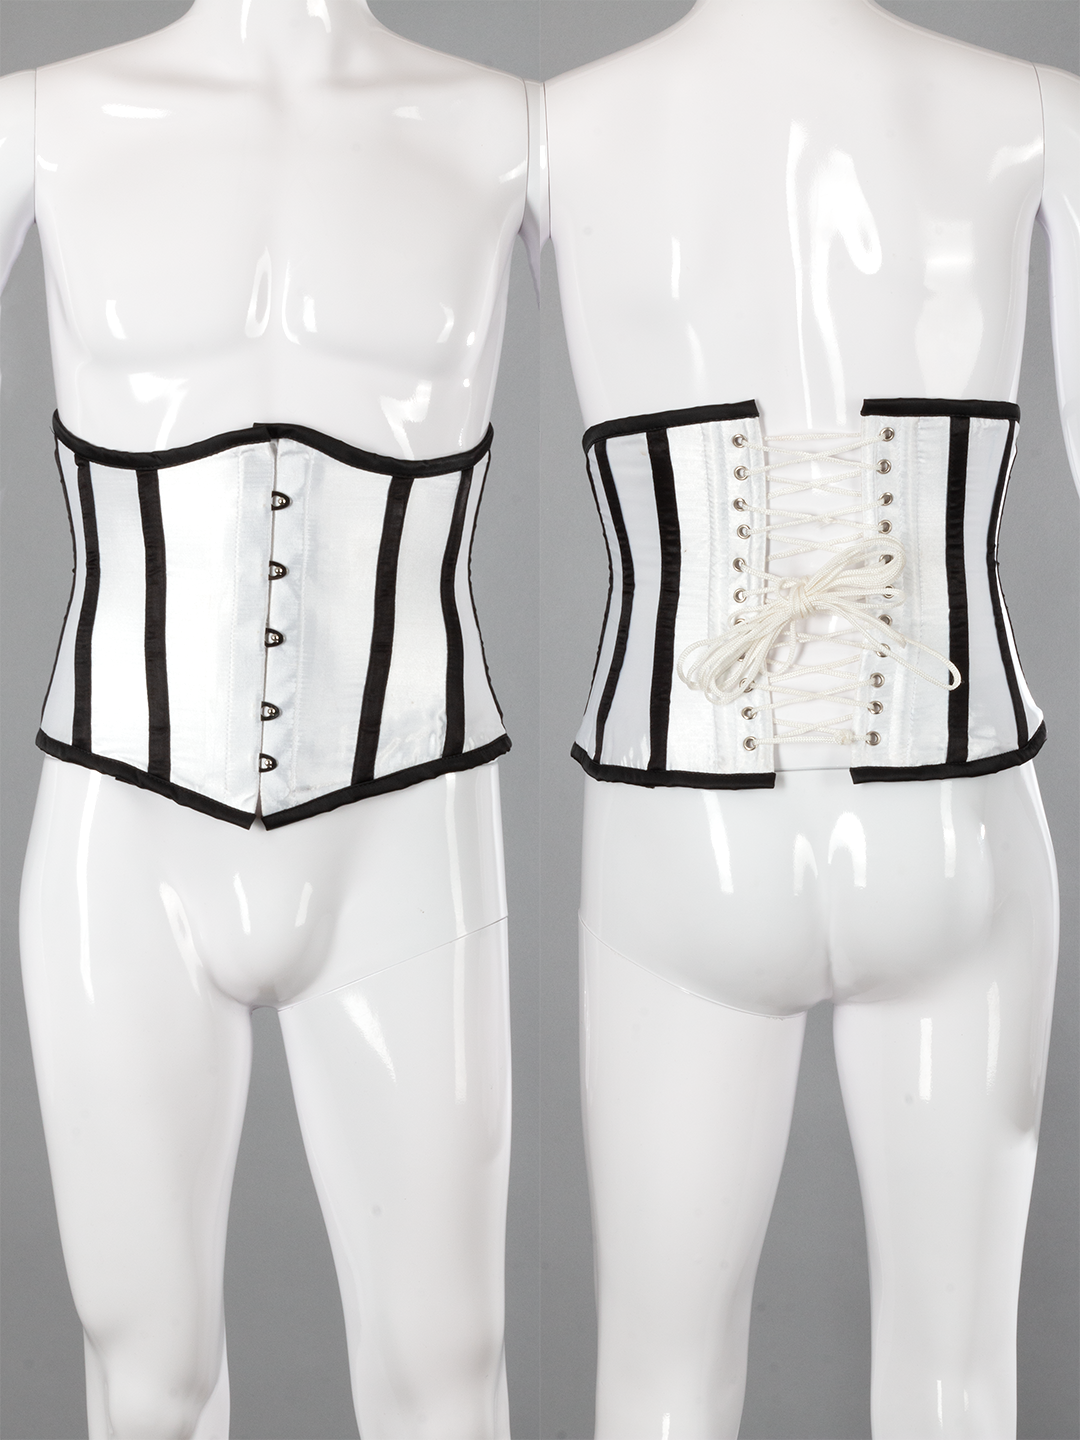 Candy Contrast Underbust